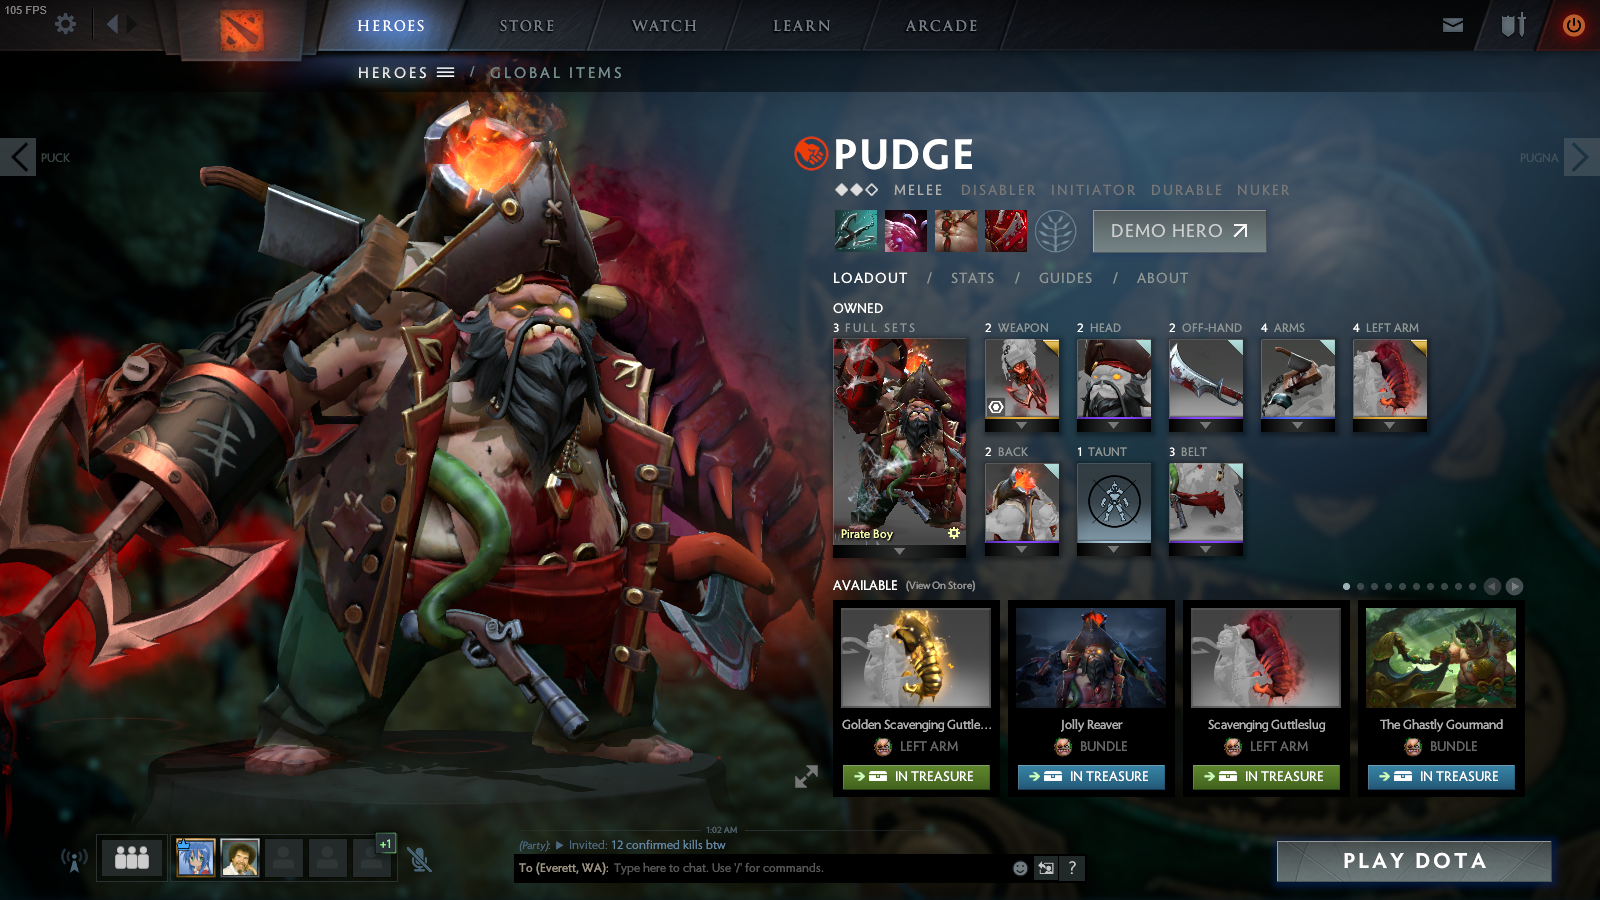 Cant wait for that pudge arcana